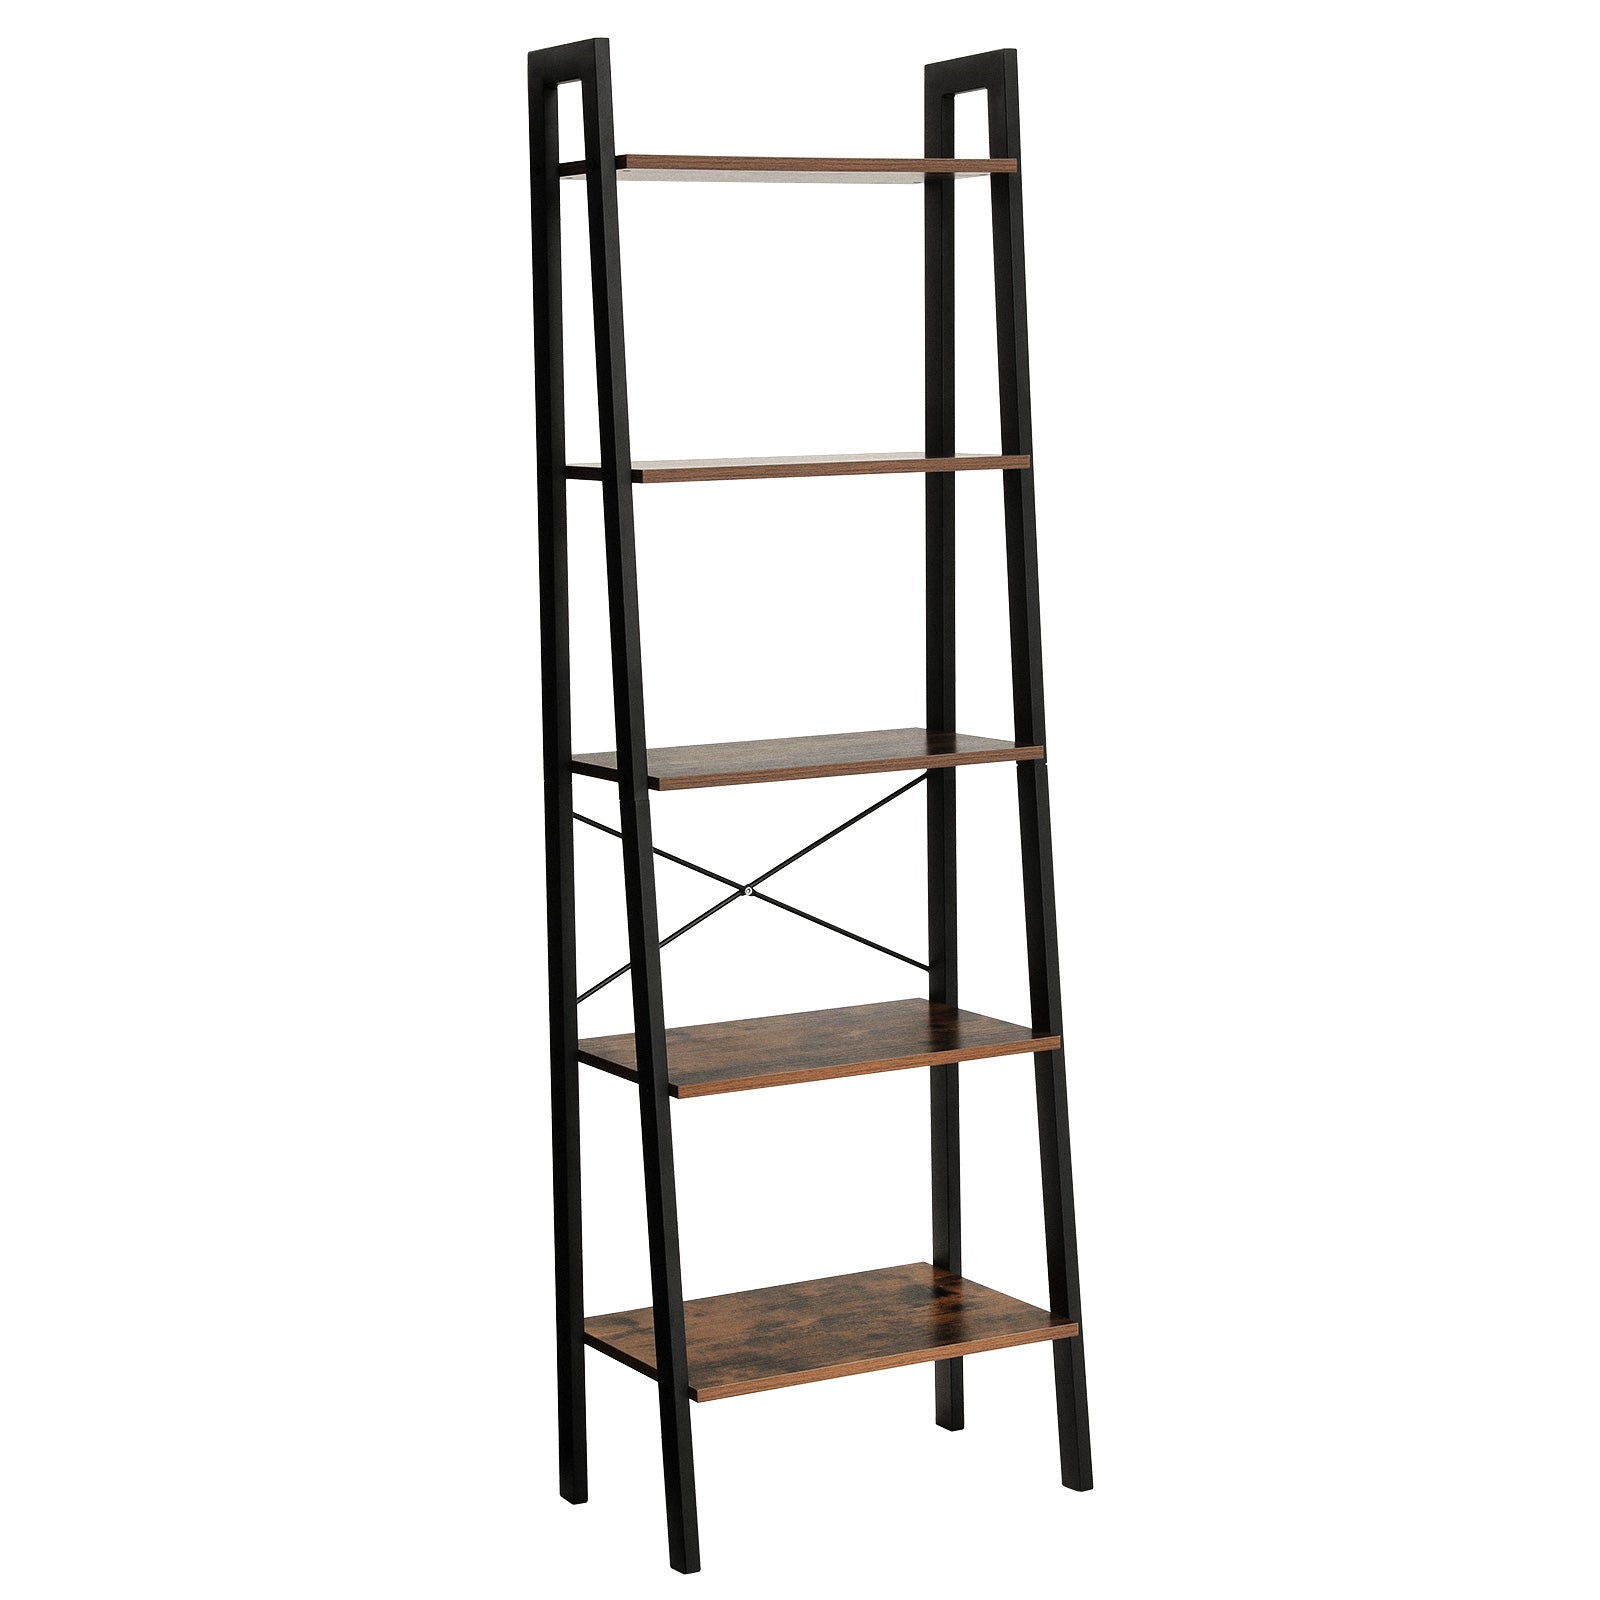 Lifespace Industrial Rustic 5 tier Ladder Shelves - Lifespace